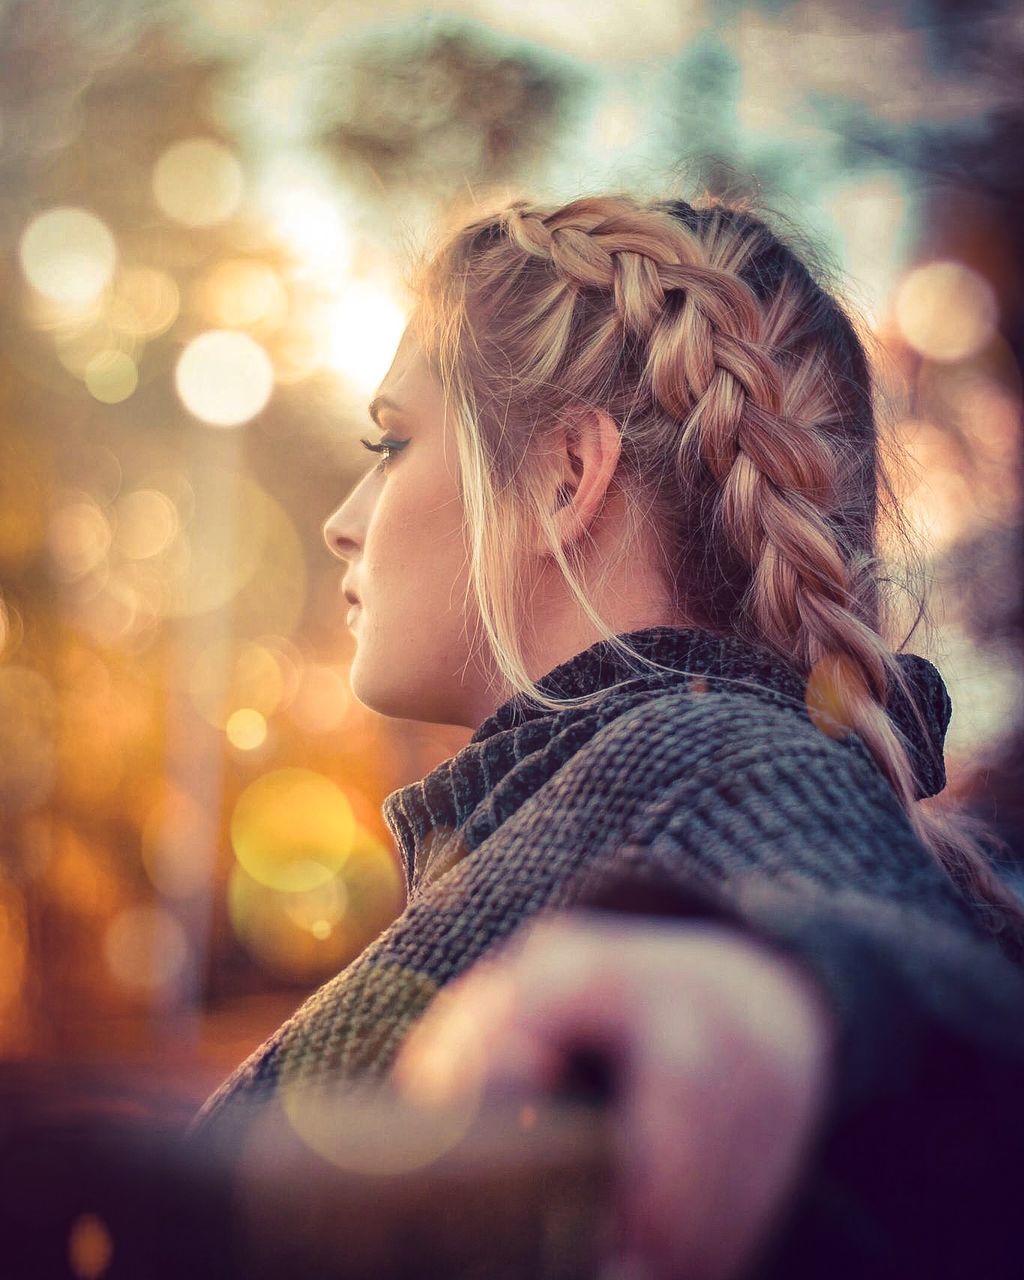 one person, young adult, hair, real people, headshot, lifestyles, beautiful woman, young women, portrait, hairstyle, leisure activity, women, side view, blond hair, beauty, focus on foreground, long hair, looking, outdoors, contemplation, scarf, teenager